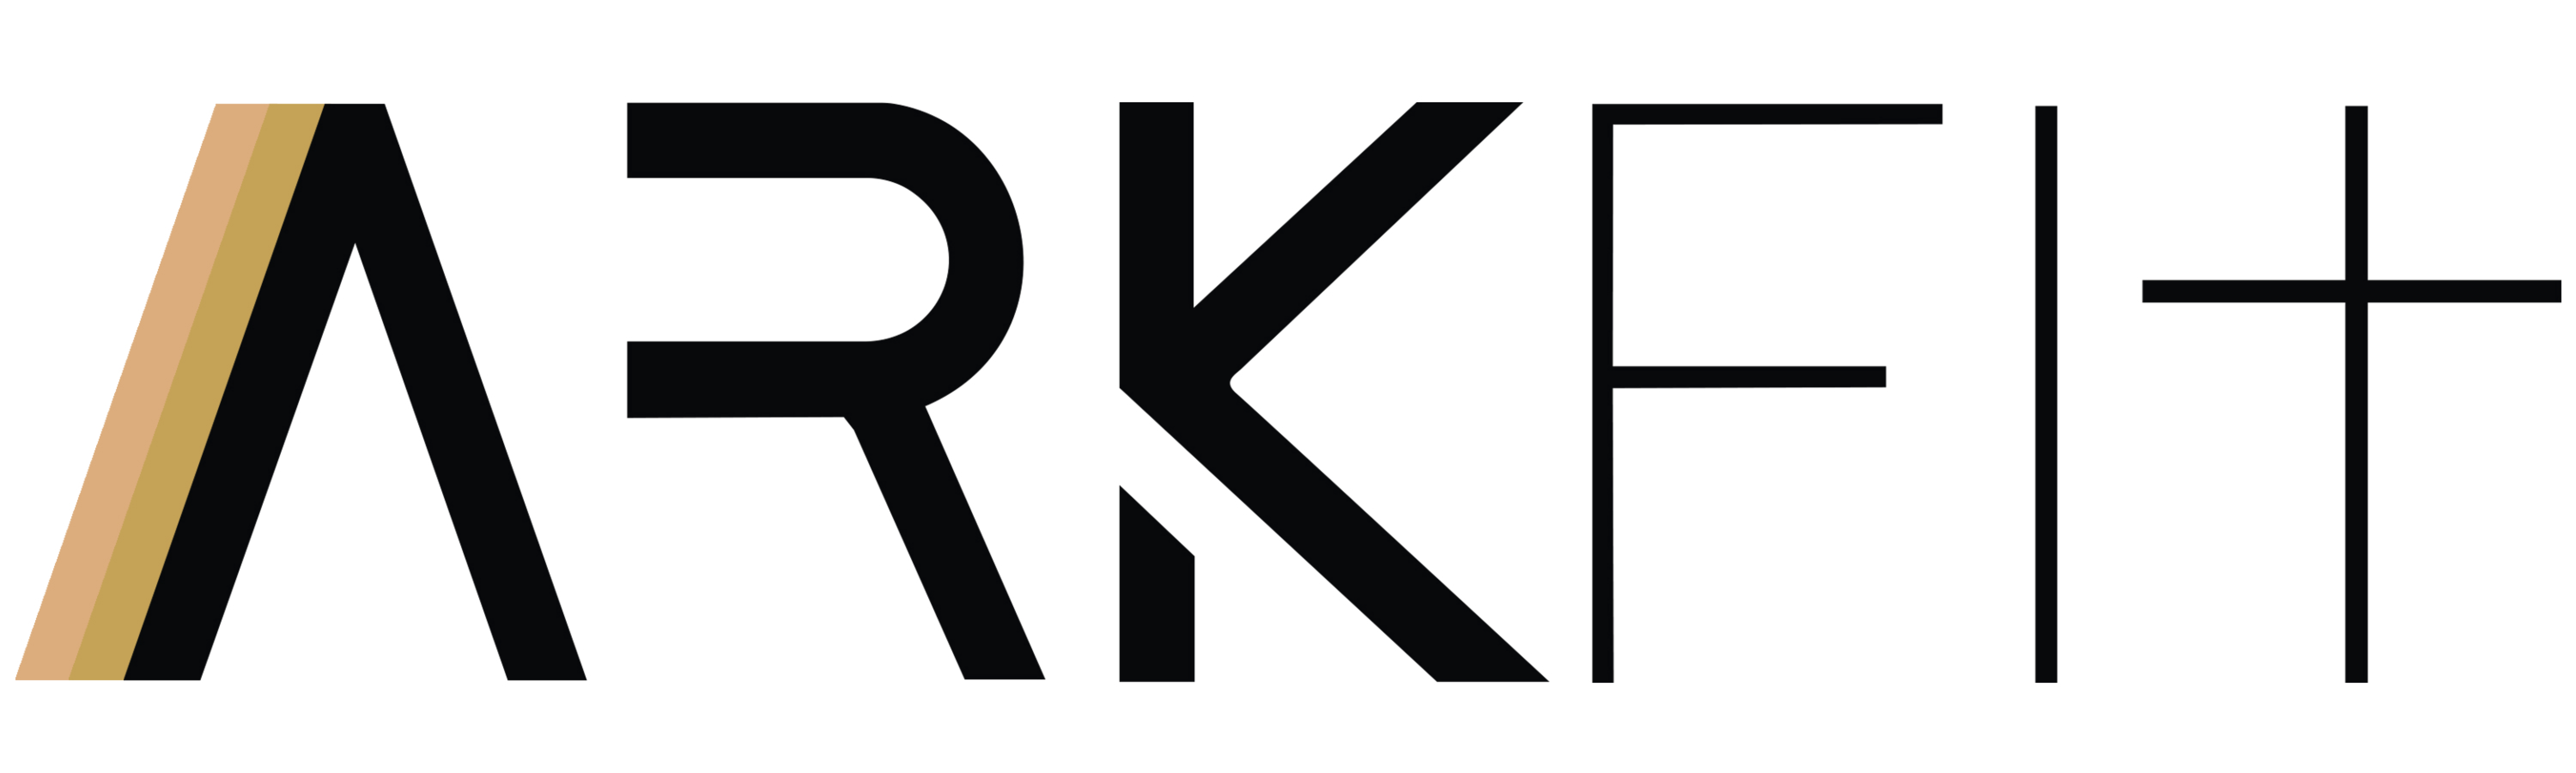 The Ark Fit logo